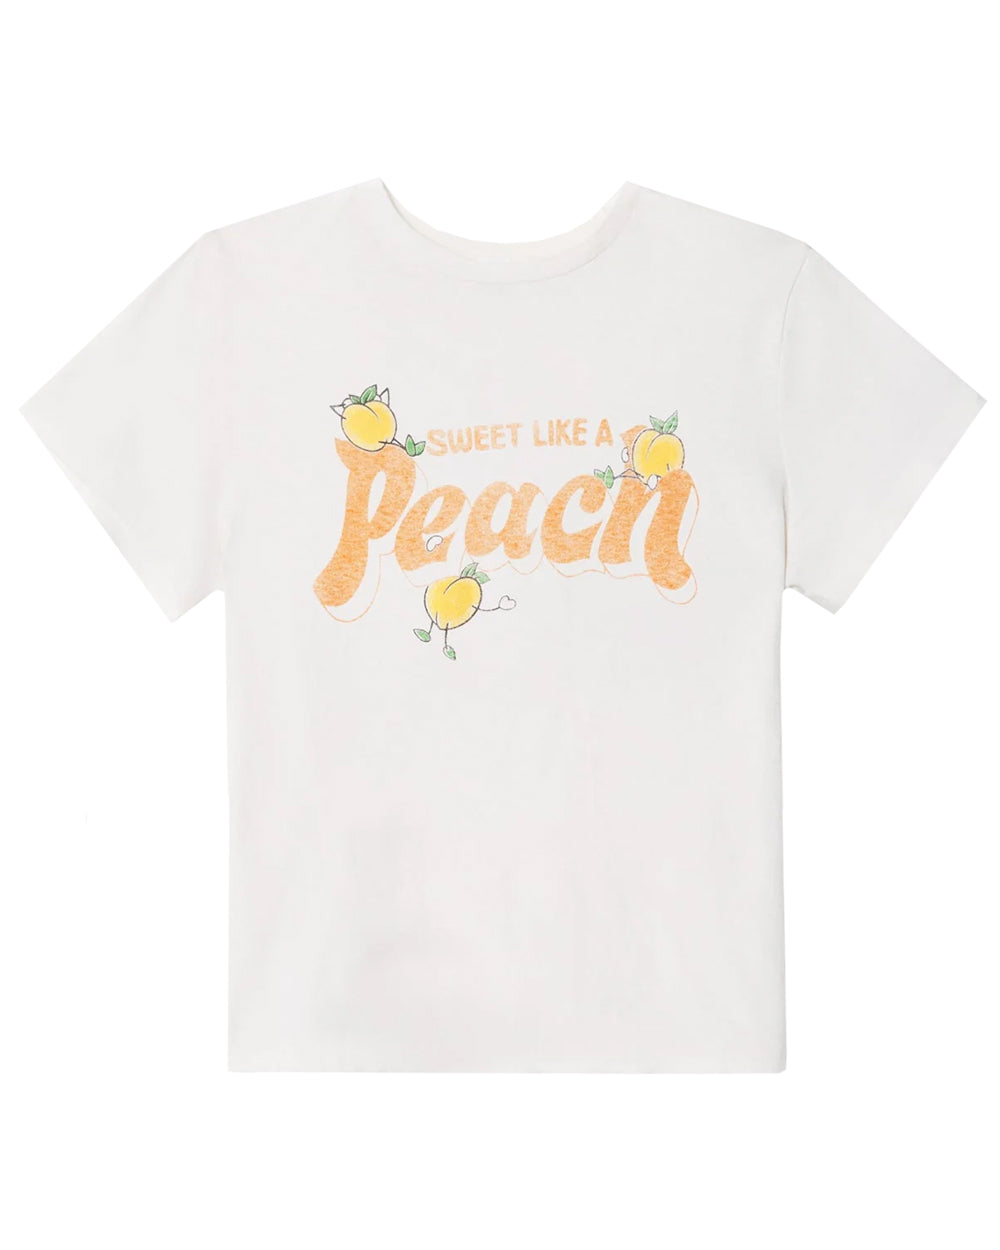 Like A Peach Classic Tee in Vintage White